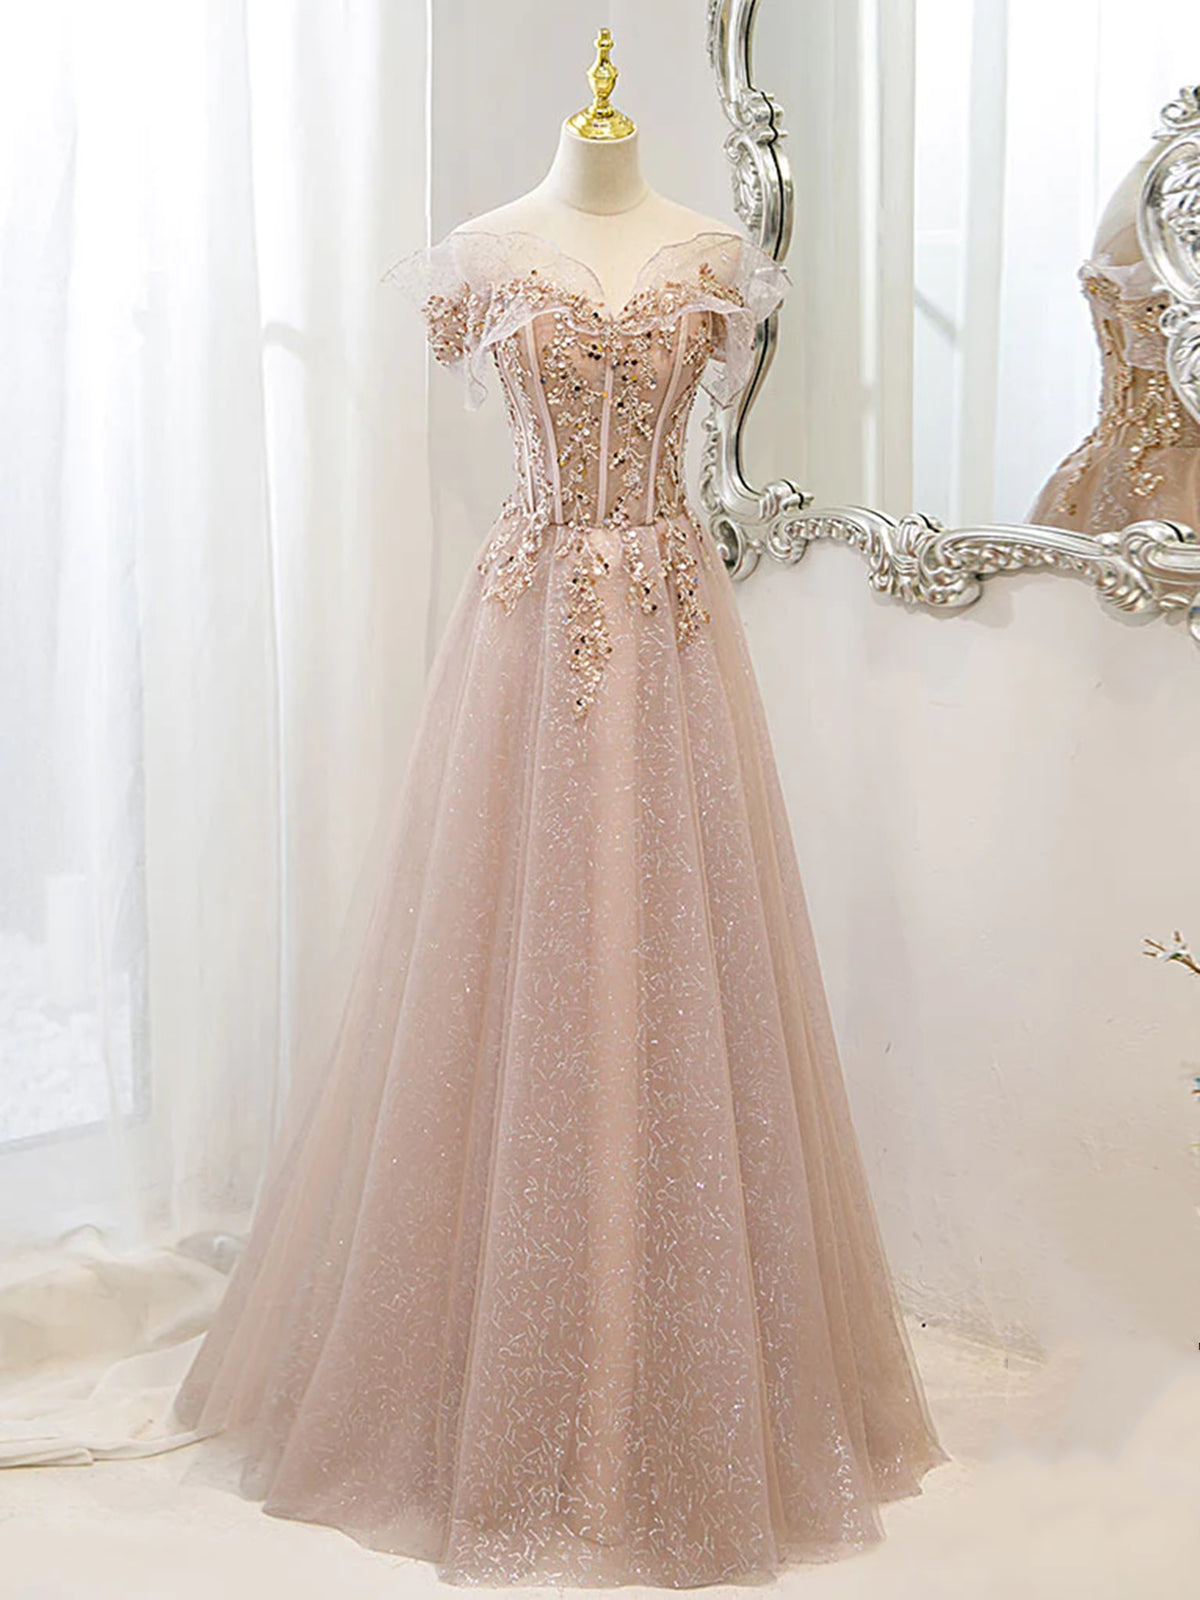 Off the Shoulder Champagne Tulle Lace Prom Dress Outfits For Girls, Off Shoulder Champagne Lace Formal Dress